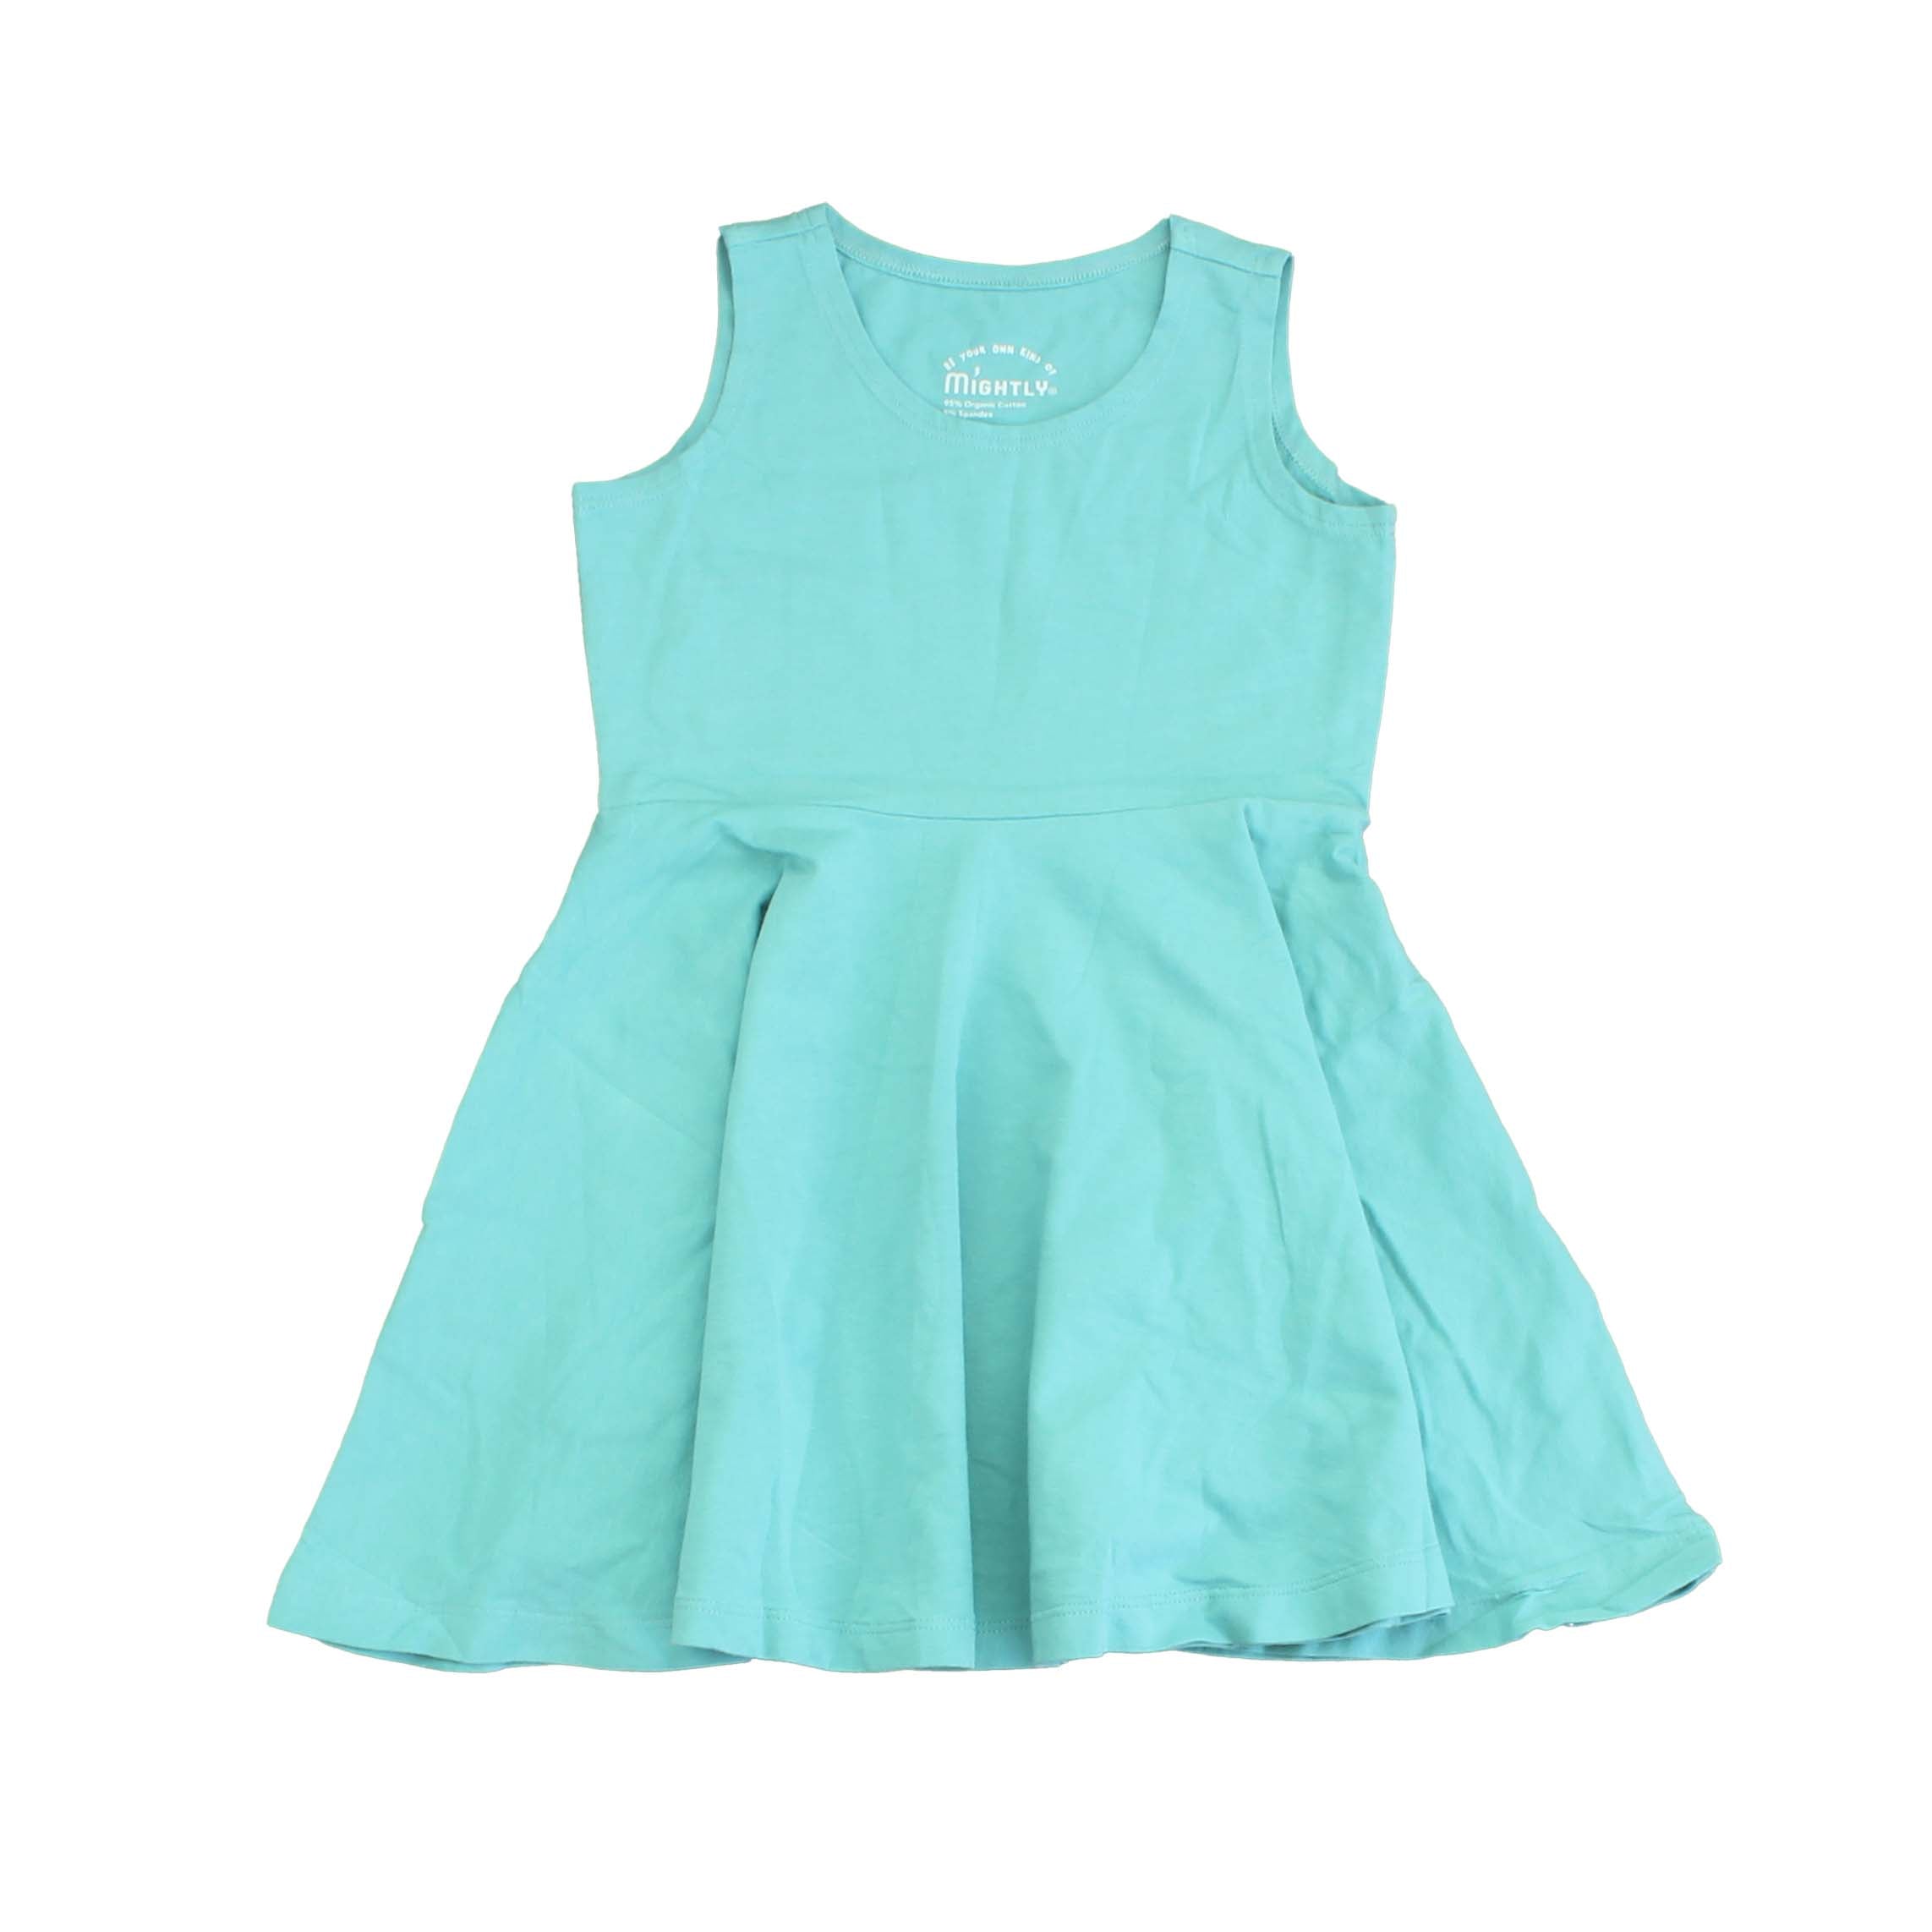 Pre-owned Blue Dress size: 2T